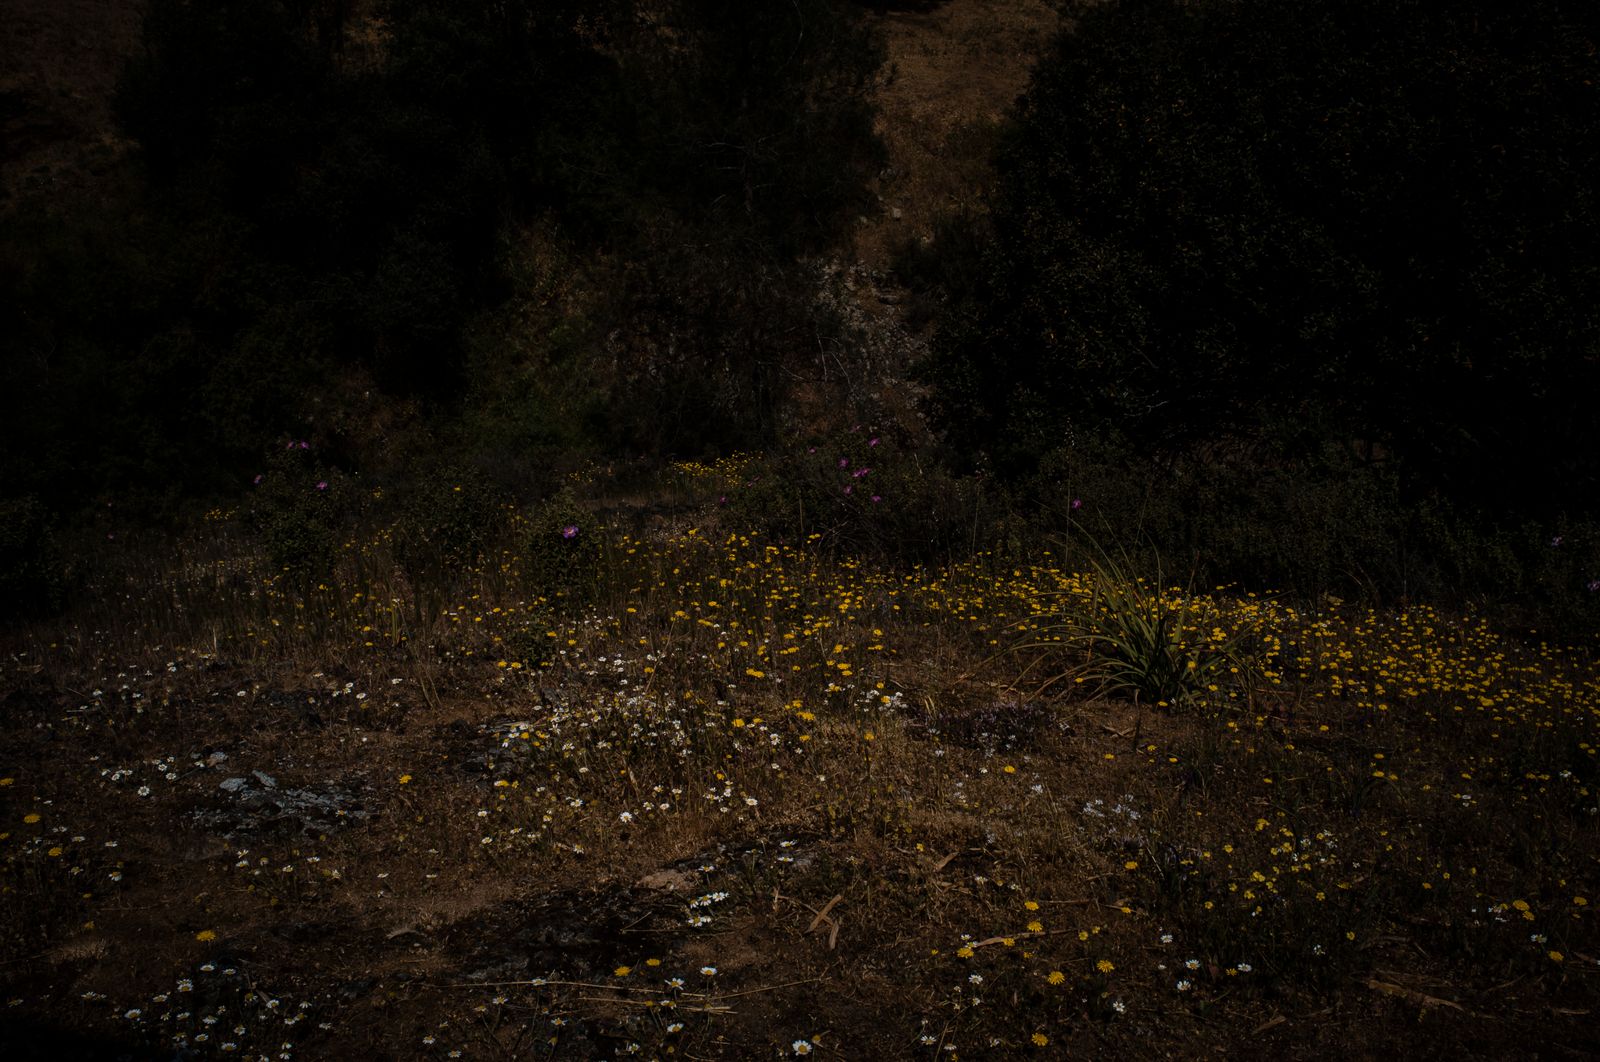 © Alinne Rezende - Image from the The last letter: what remains behind photography project